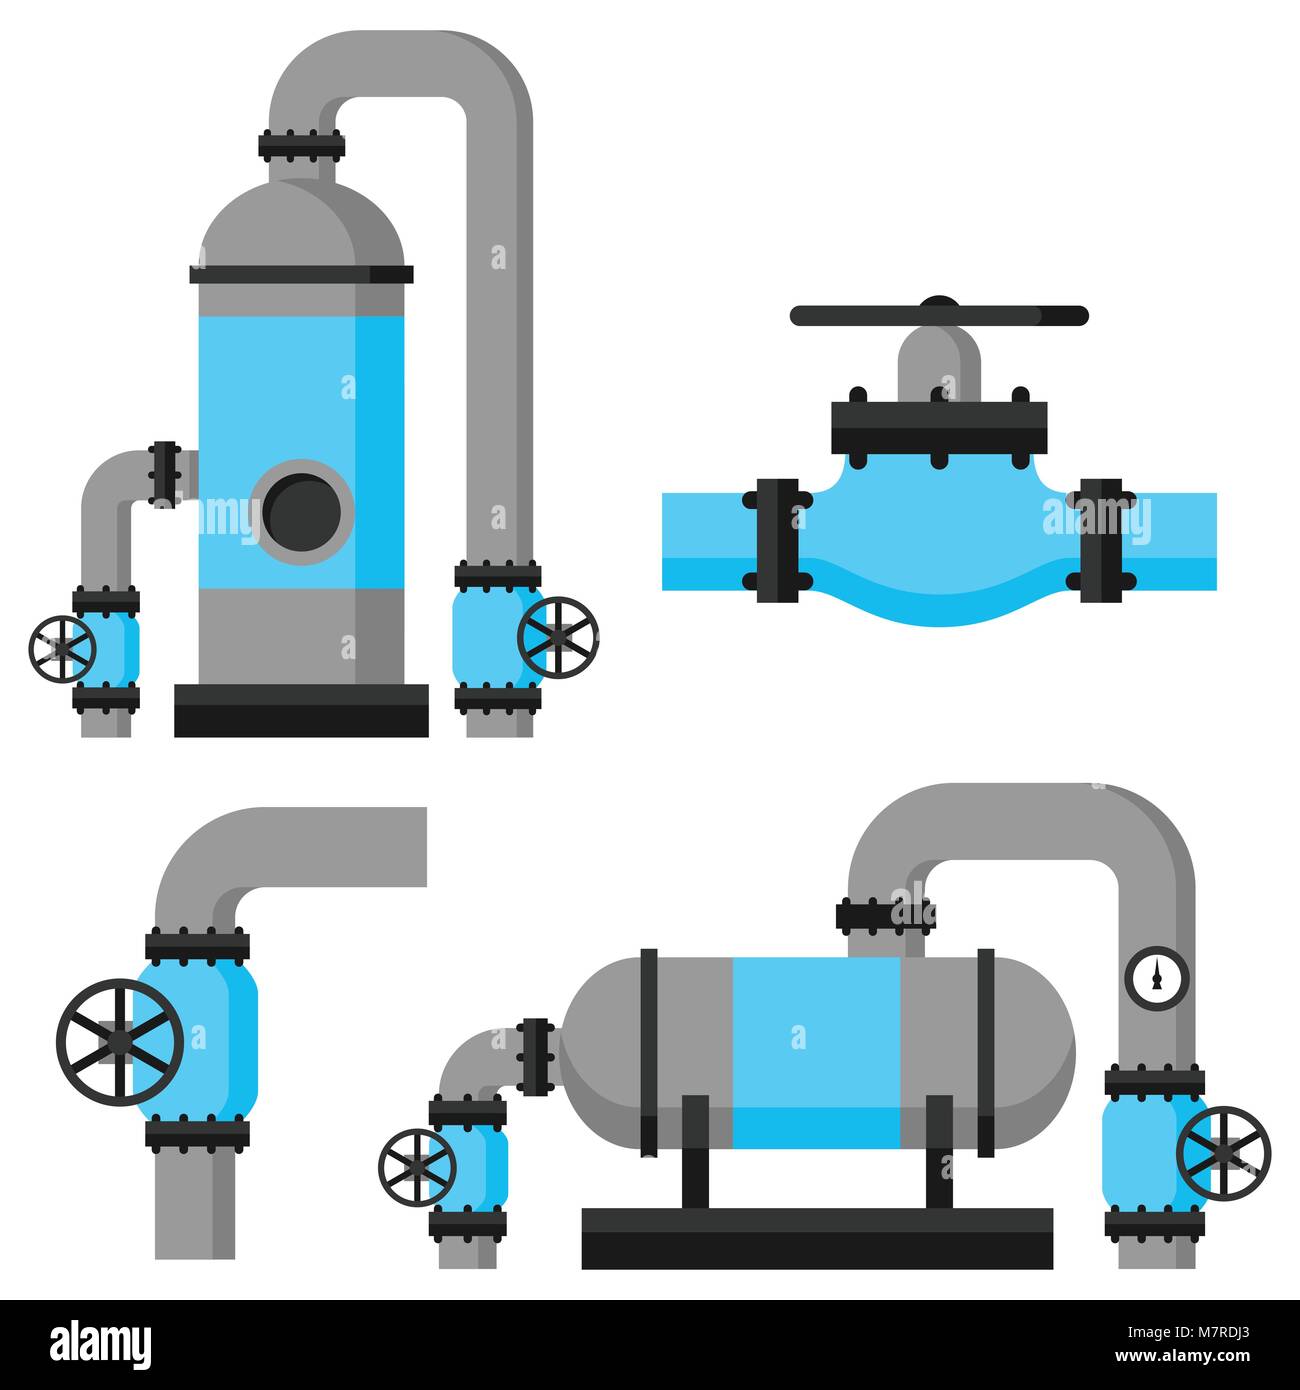 Natural gas heat exchanger, control valves and storage. Set of equipment Stock Vector